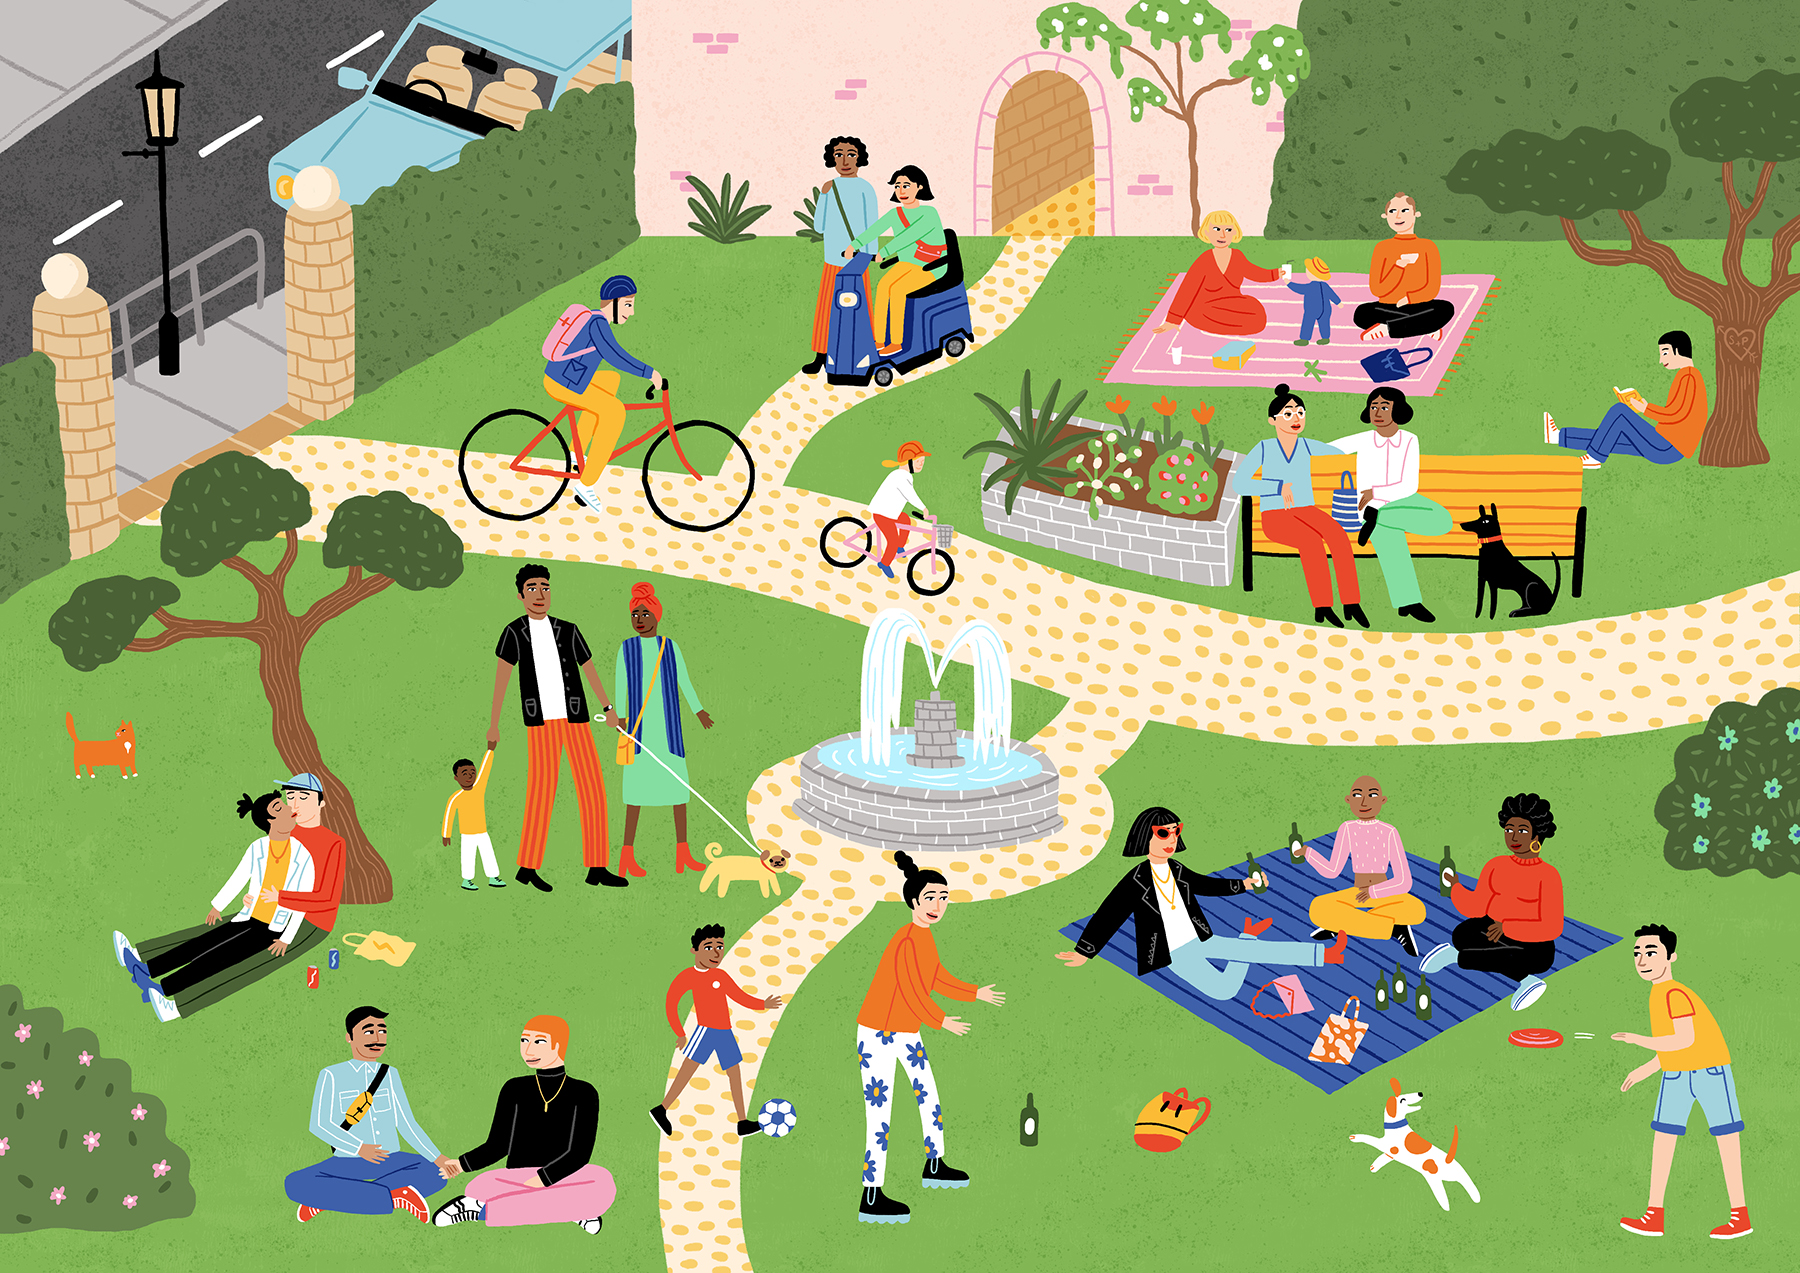 Illustration of a public park scene, full of people doing various activities.